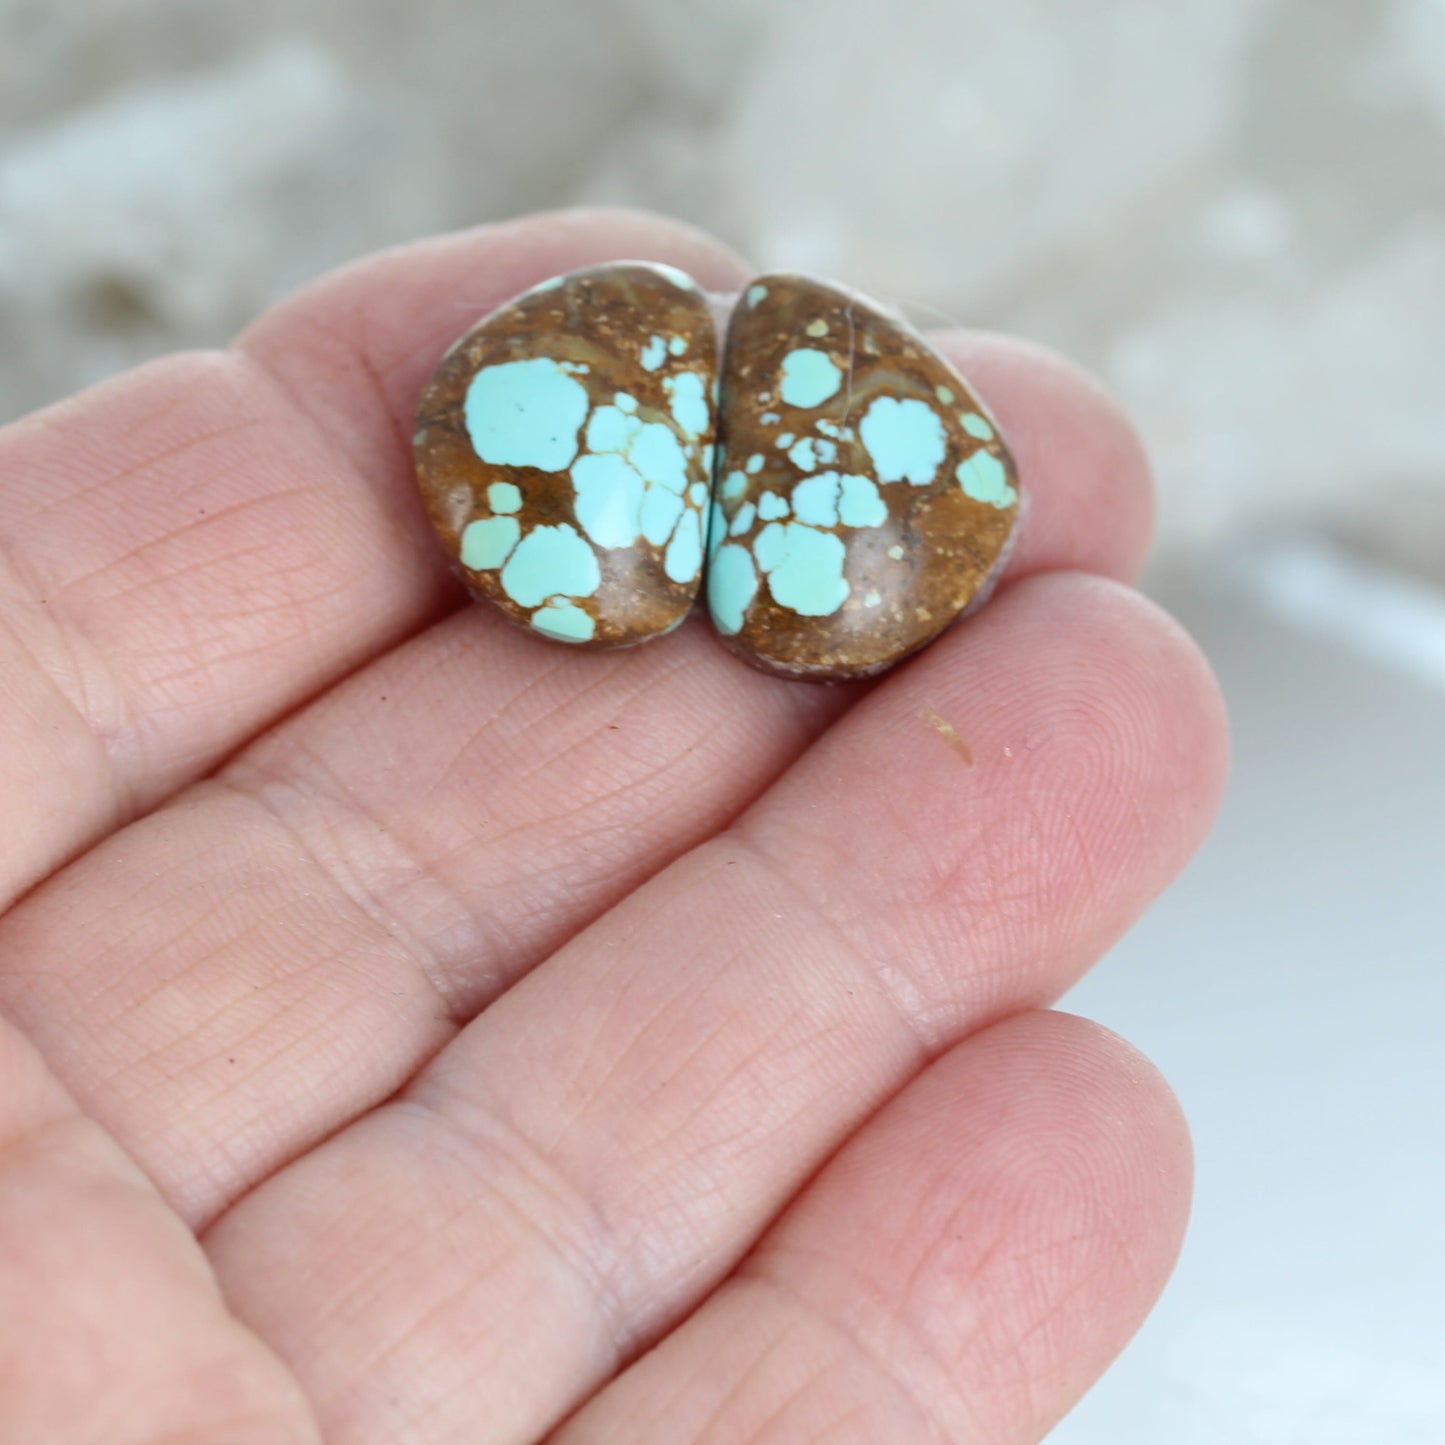 Nevada #8 Mine Turquoise Cabochon Earring Pair 23x16mm Sky Blue